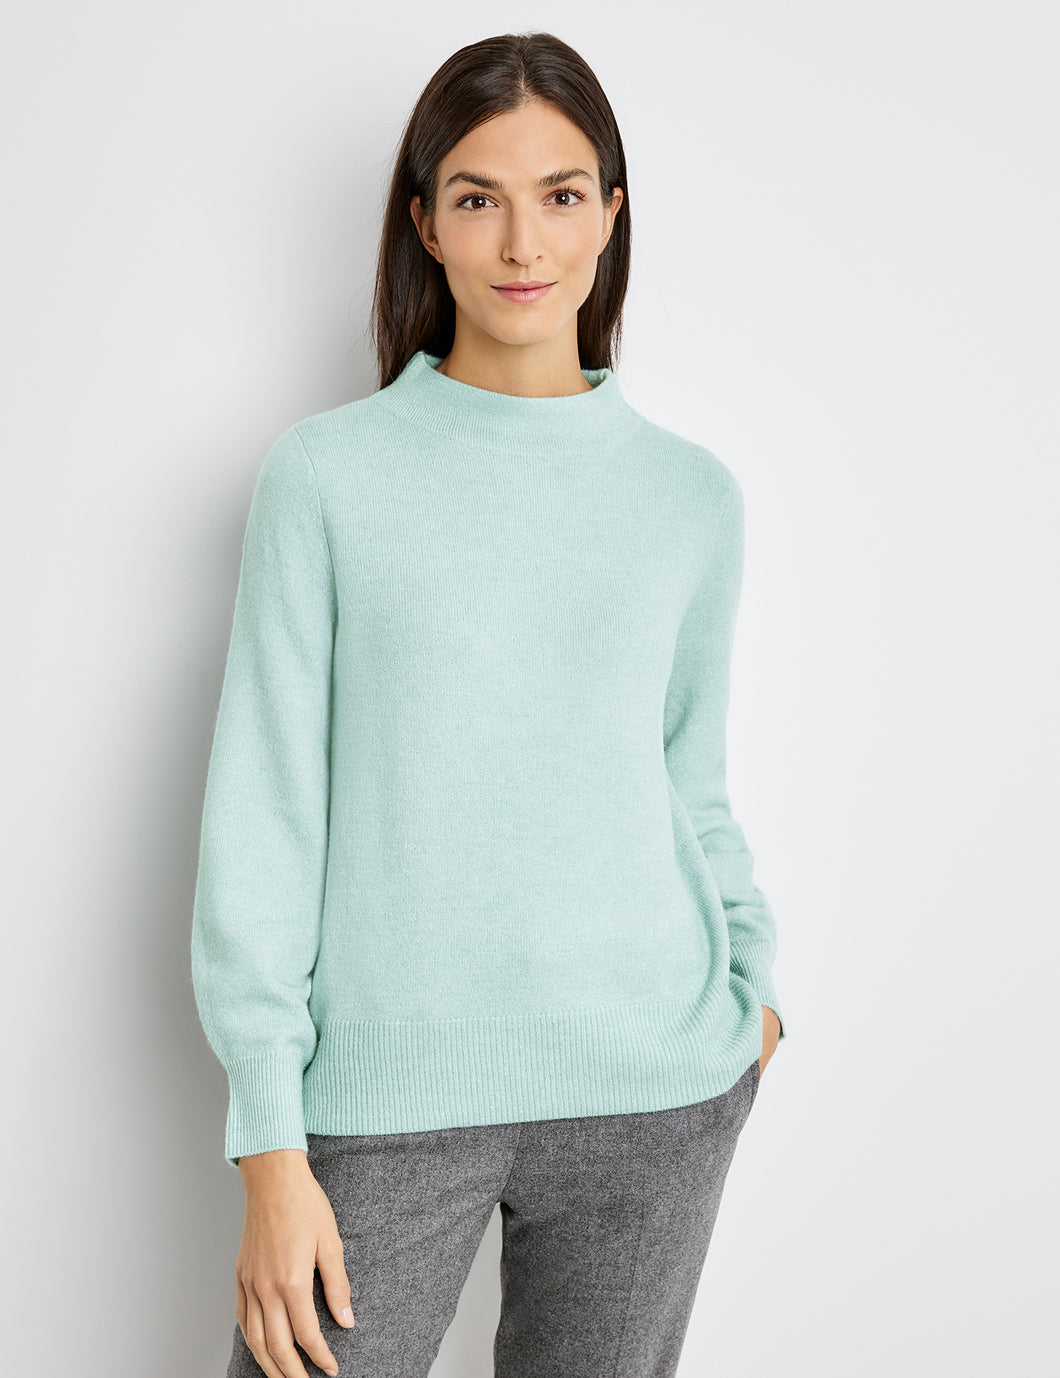 Pullover in Mint